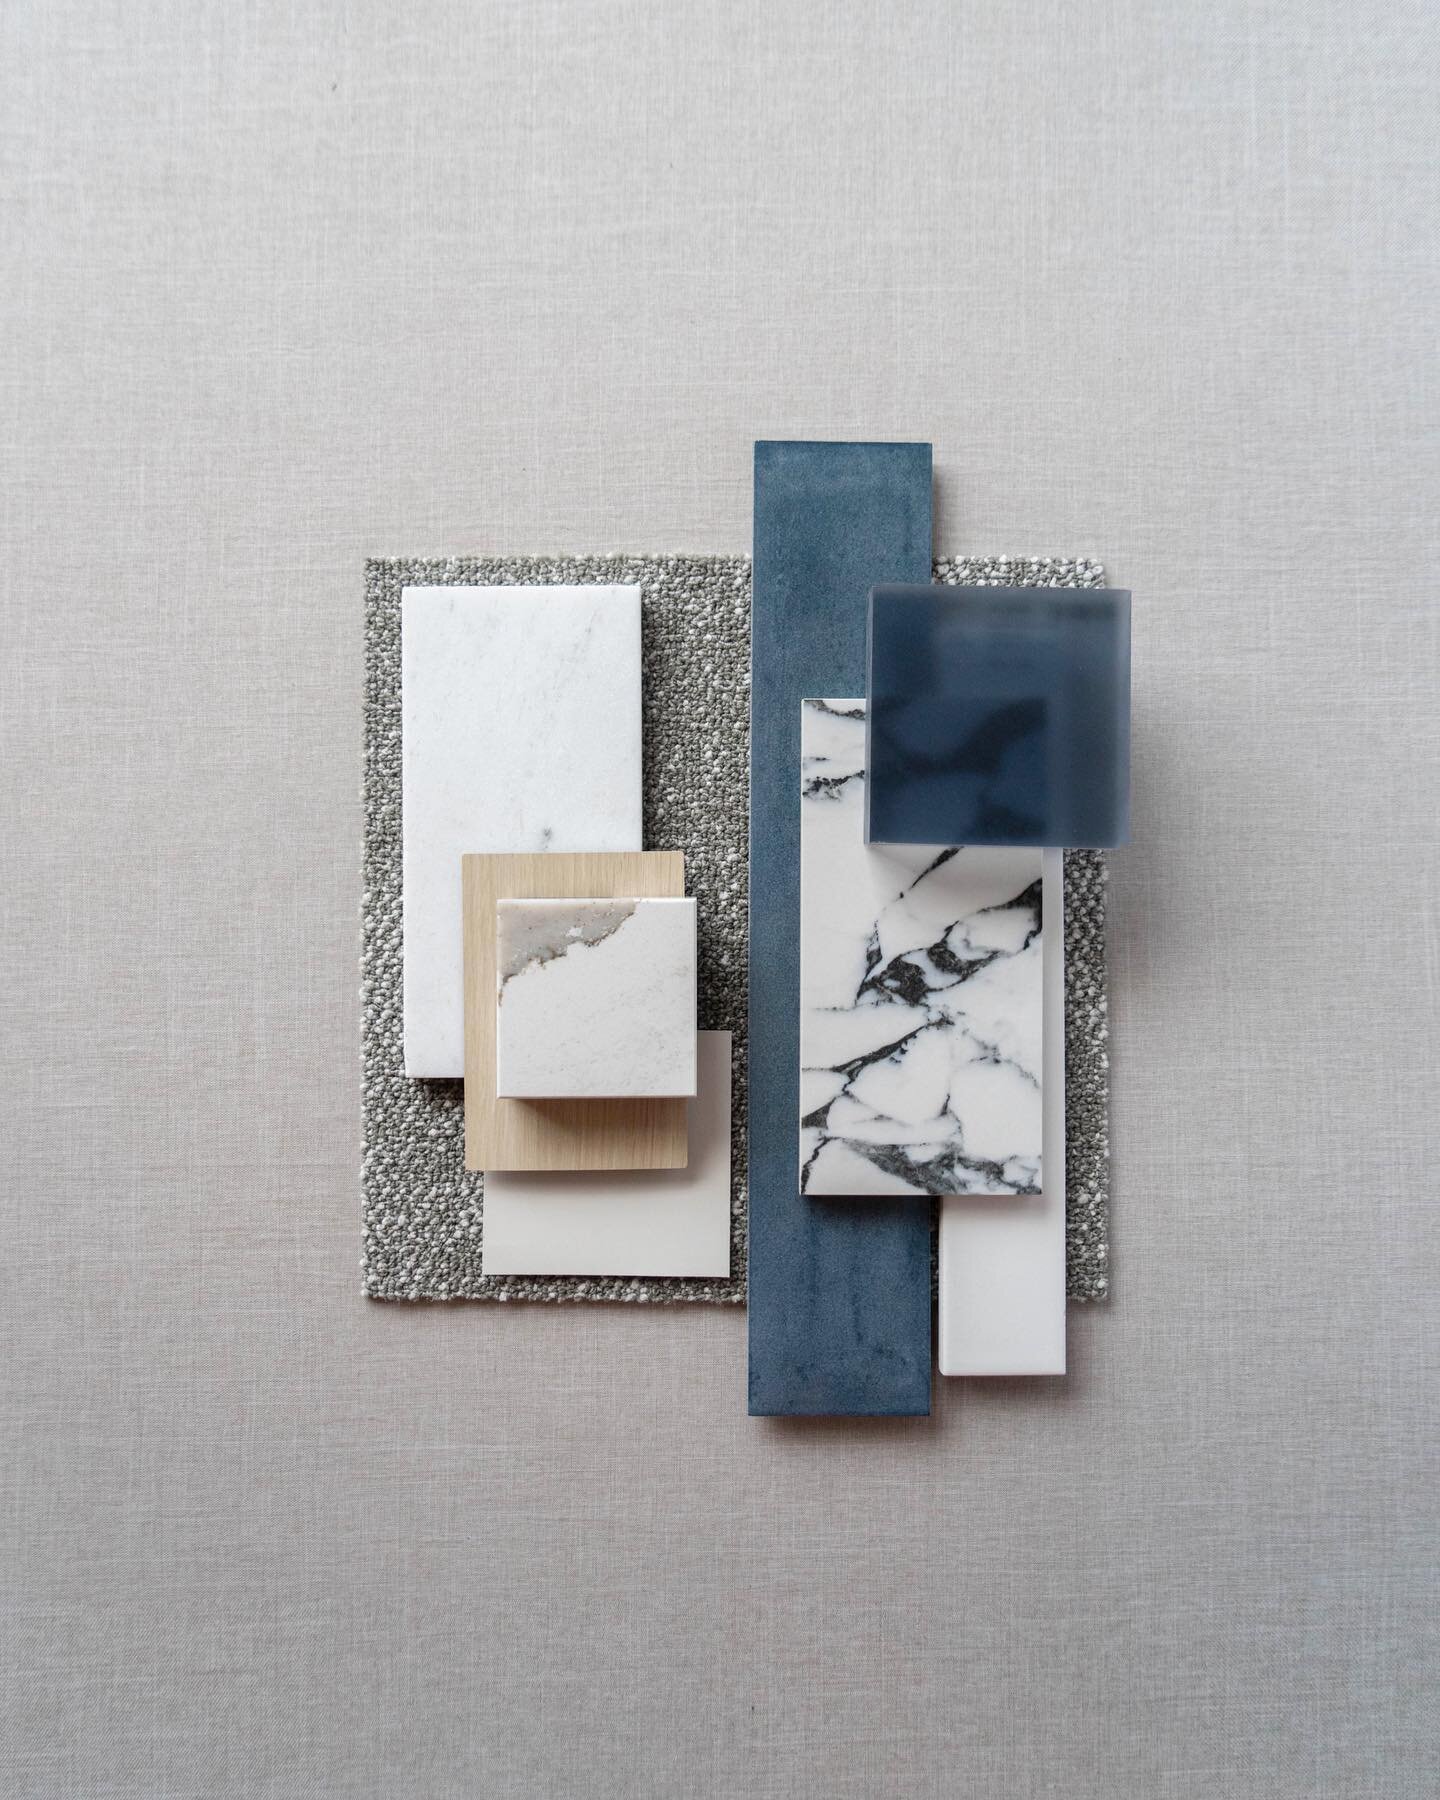 Sneak peak // new office 

Creating a sophisticated and curated space combining marbled finishes, warm timber textures, and naturally patterned textiles for tactility. Softening neutrals blend with a cooling palette of greys and blues to soothe the s